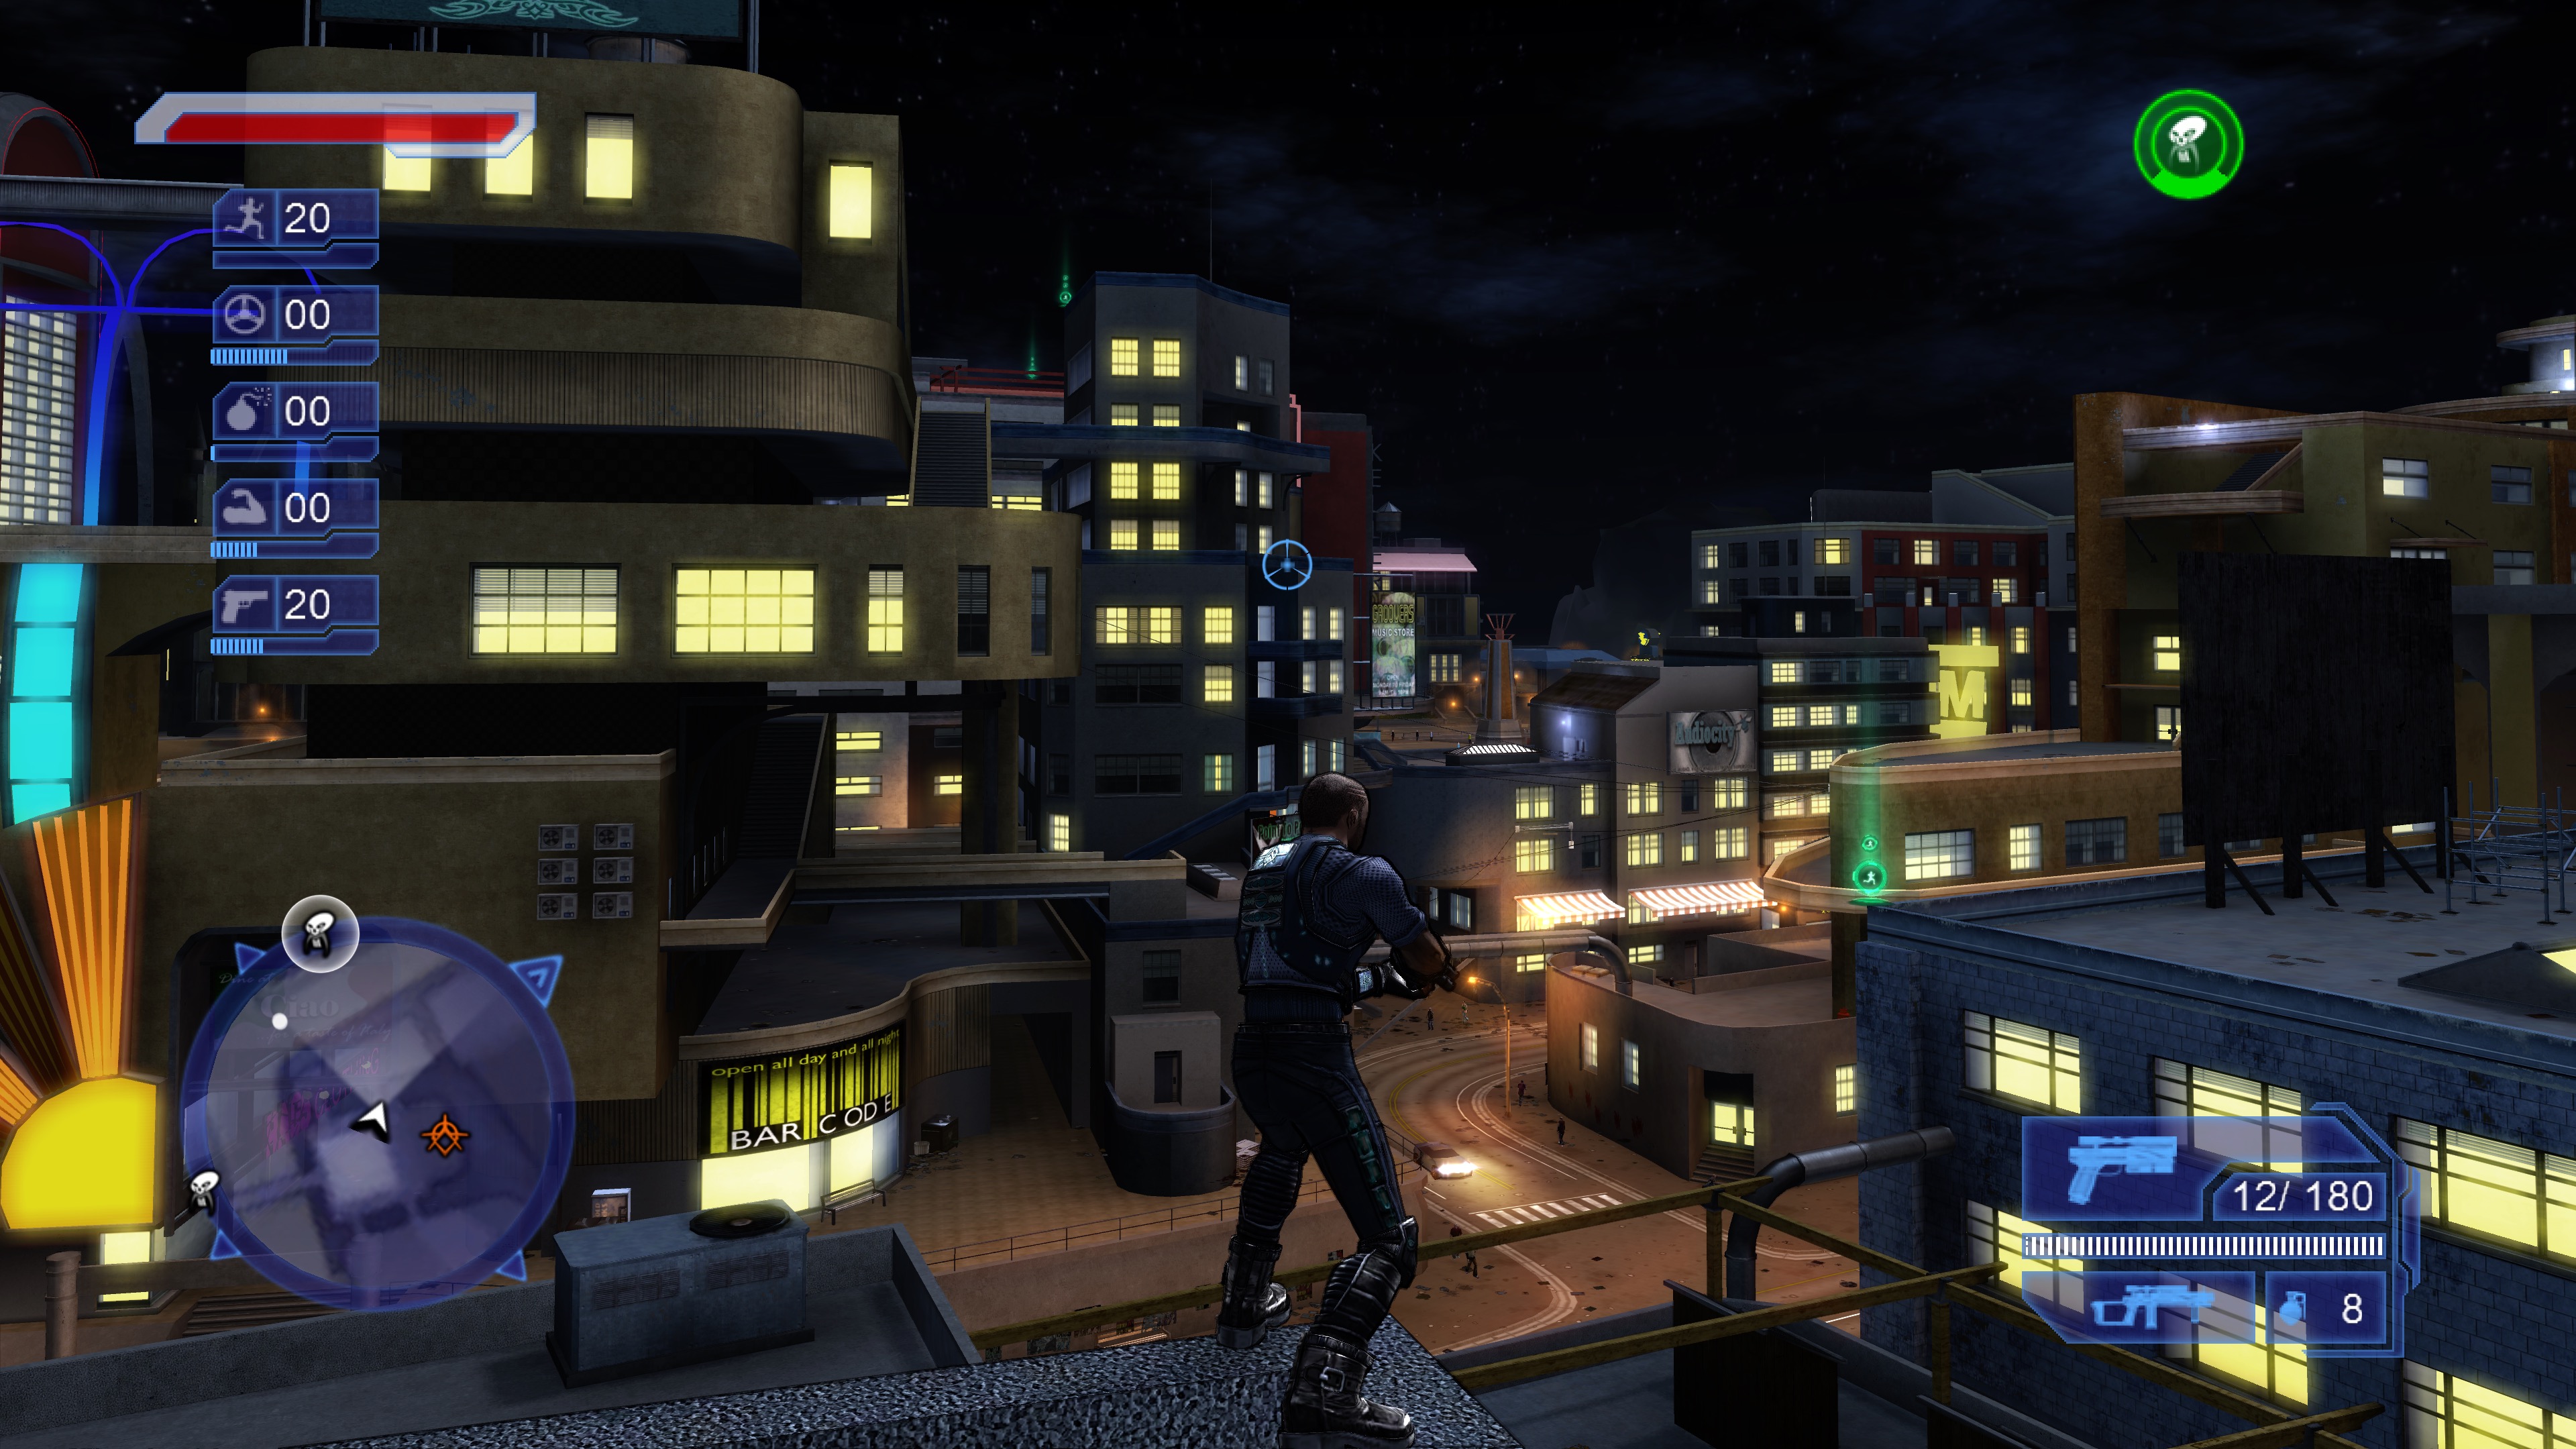 Crackdown is available for Free